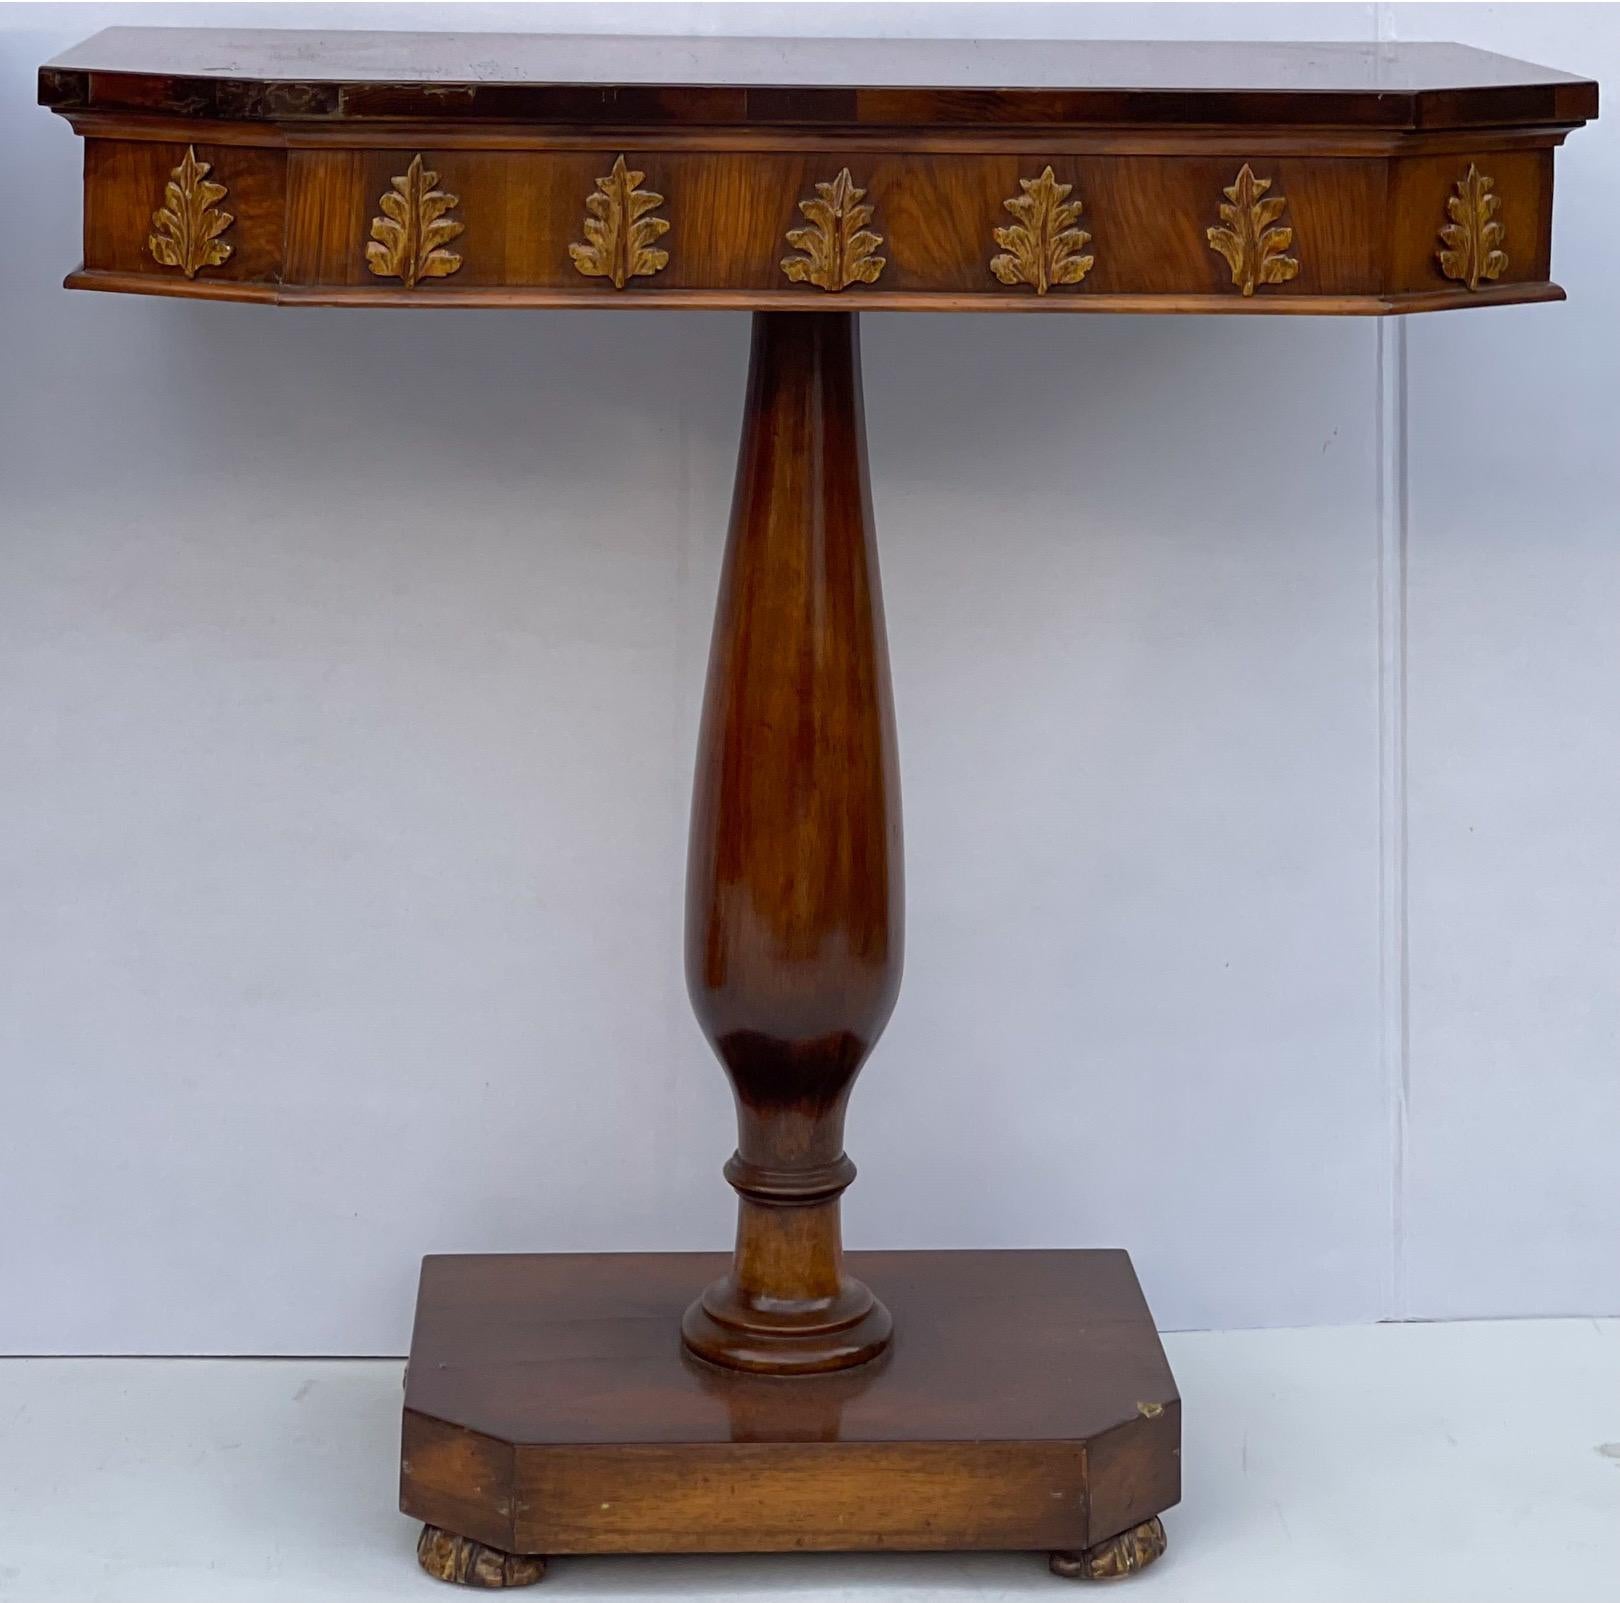 1940s Regency Style Carved Walnut and Gilt Console Tables, Pair In Good Condition For Sale In Kennesaw, GA